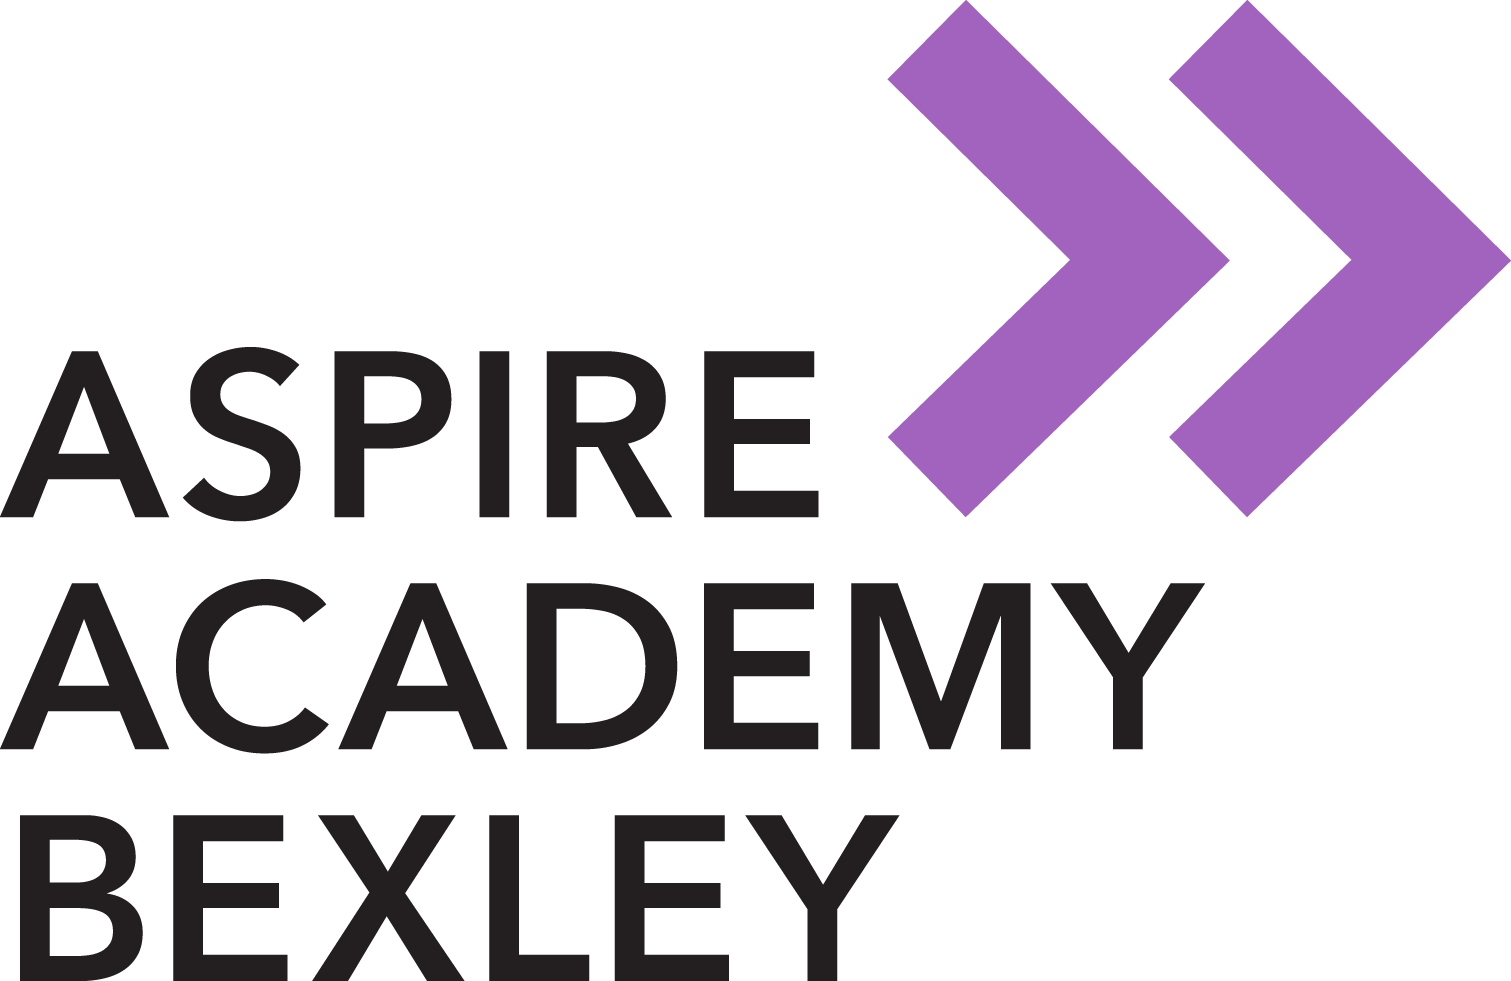 https://londonboroughofbexley-career.talent-soft.com/DynamicContent/Images/Aspire-Academy.png